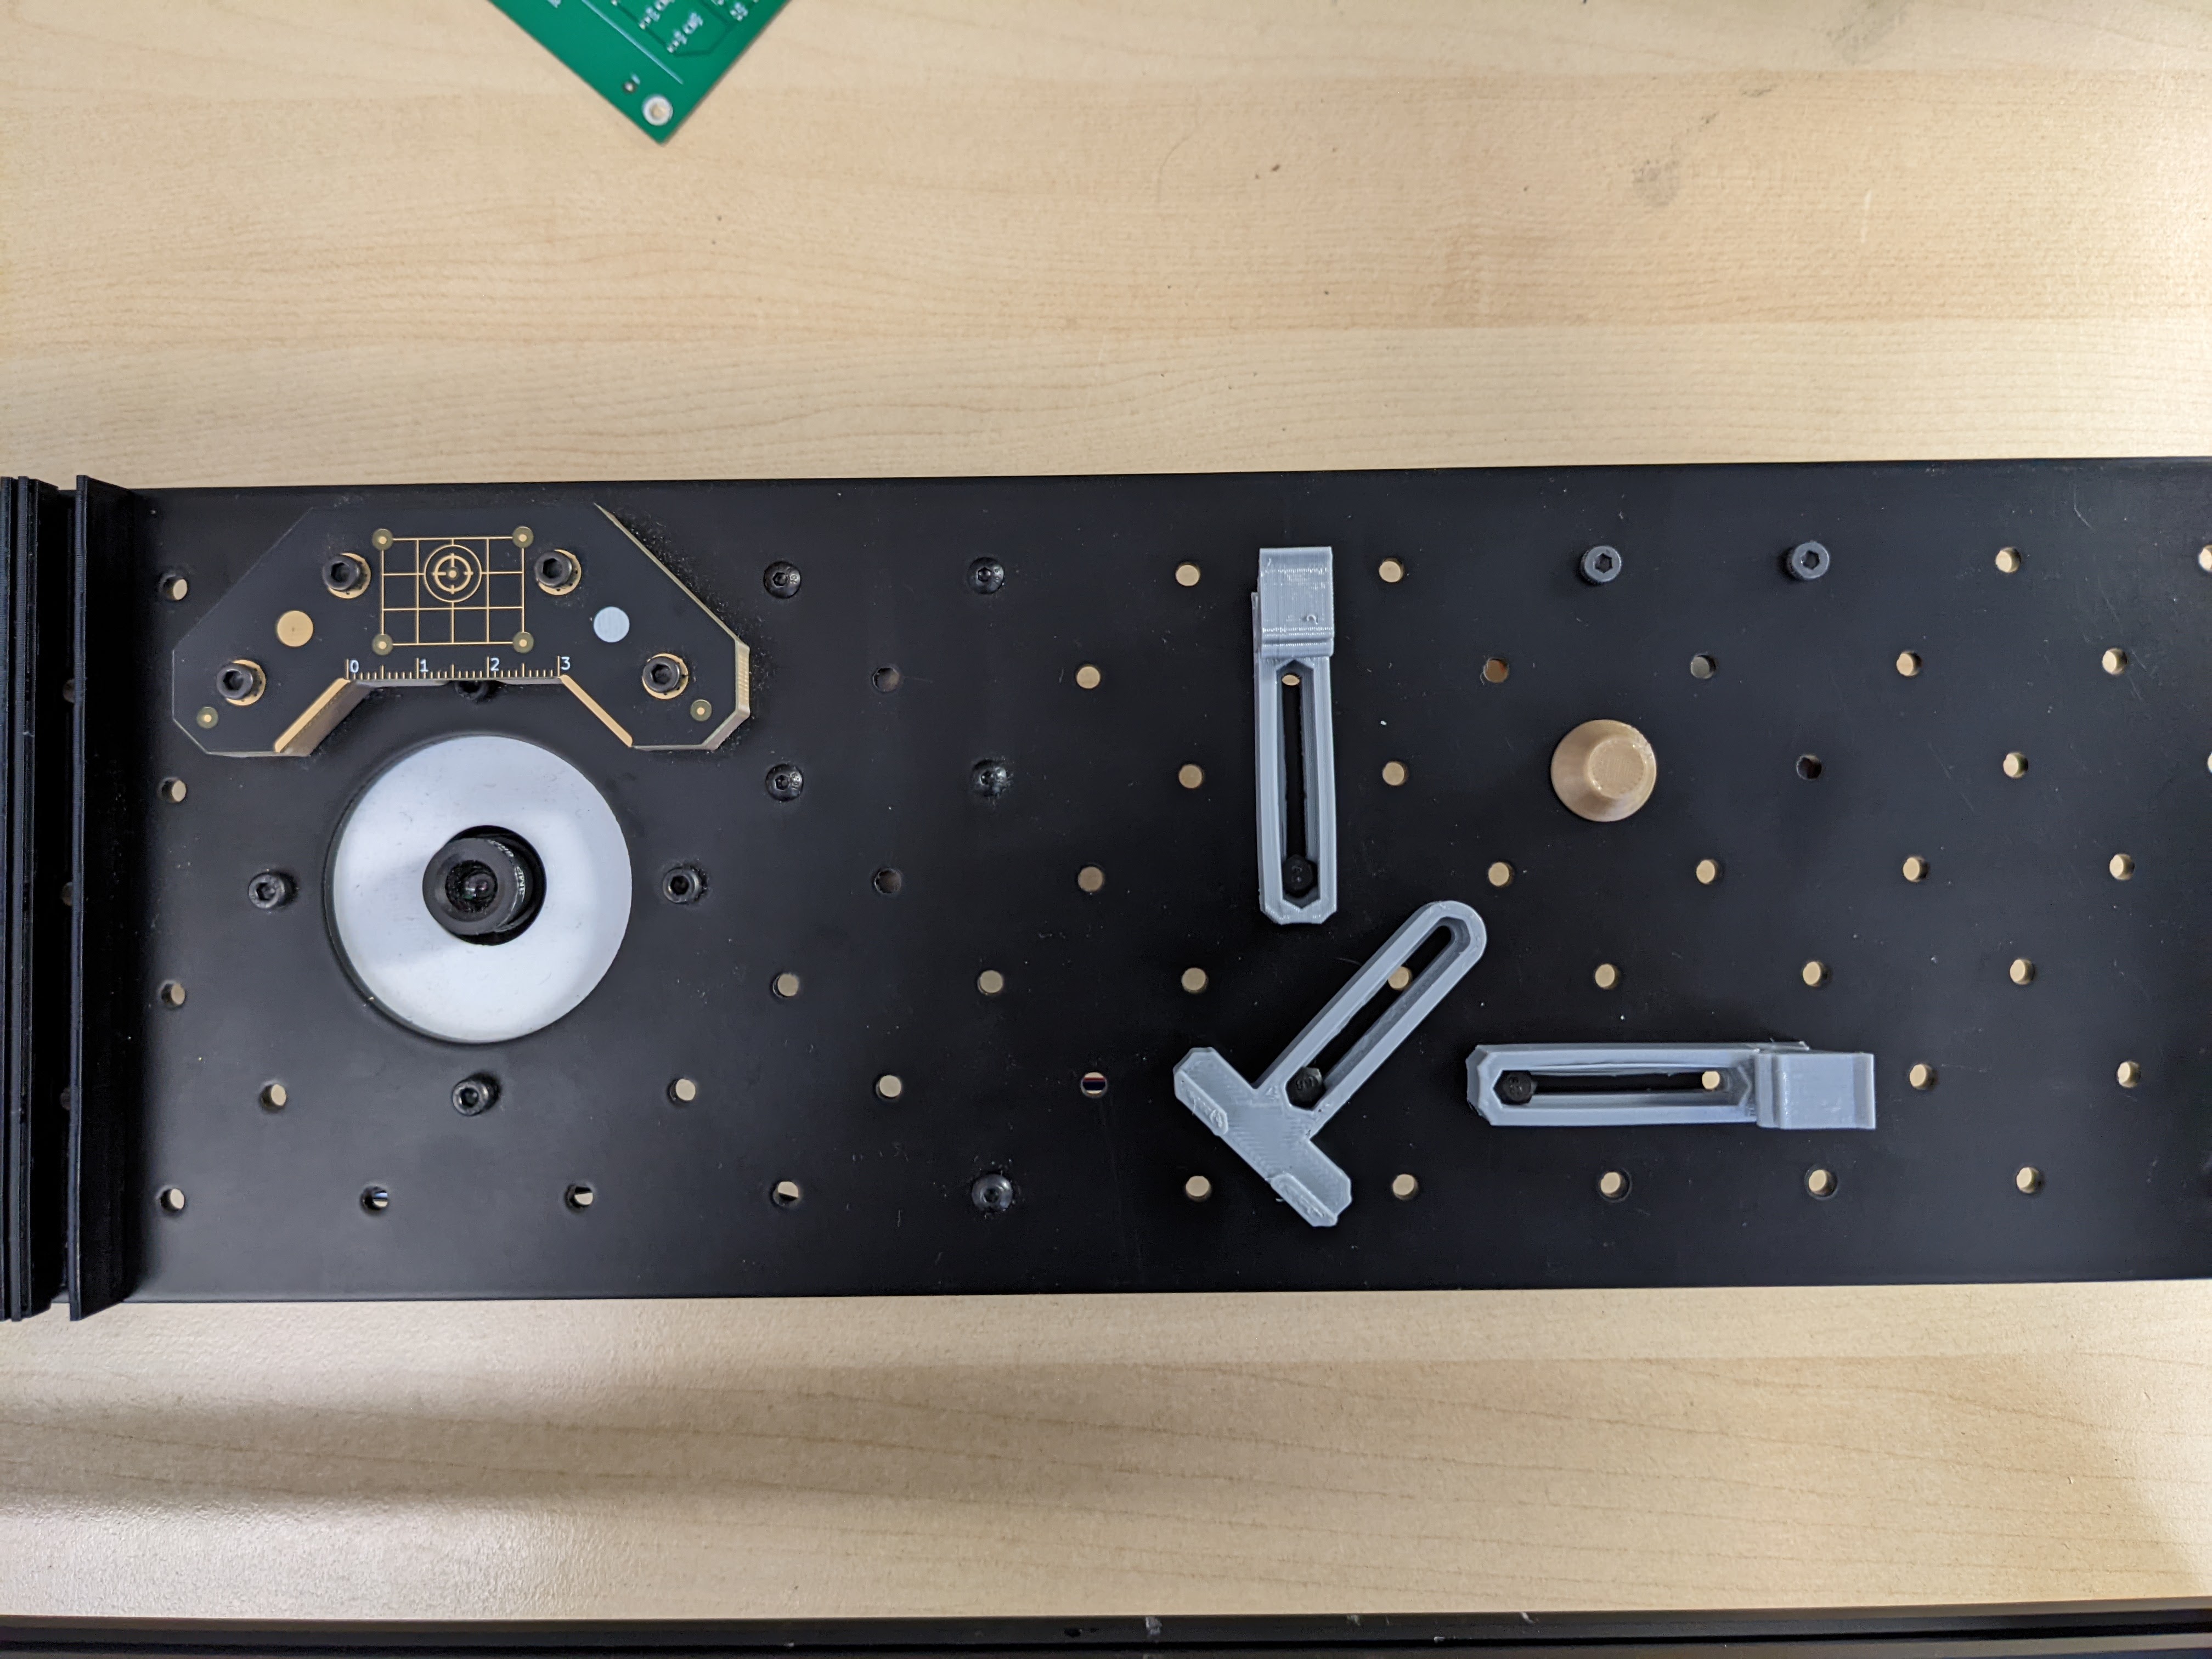 Install the board mounting hardware